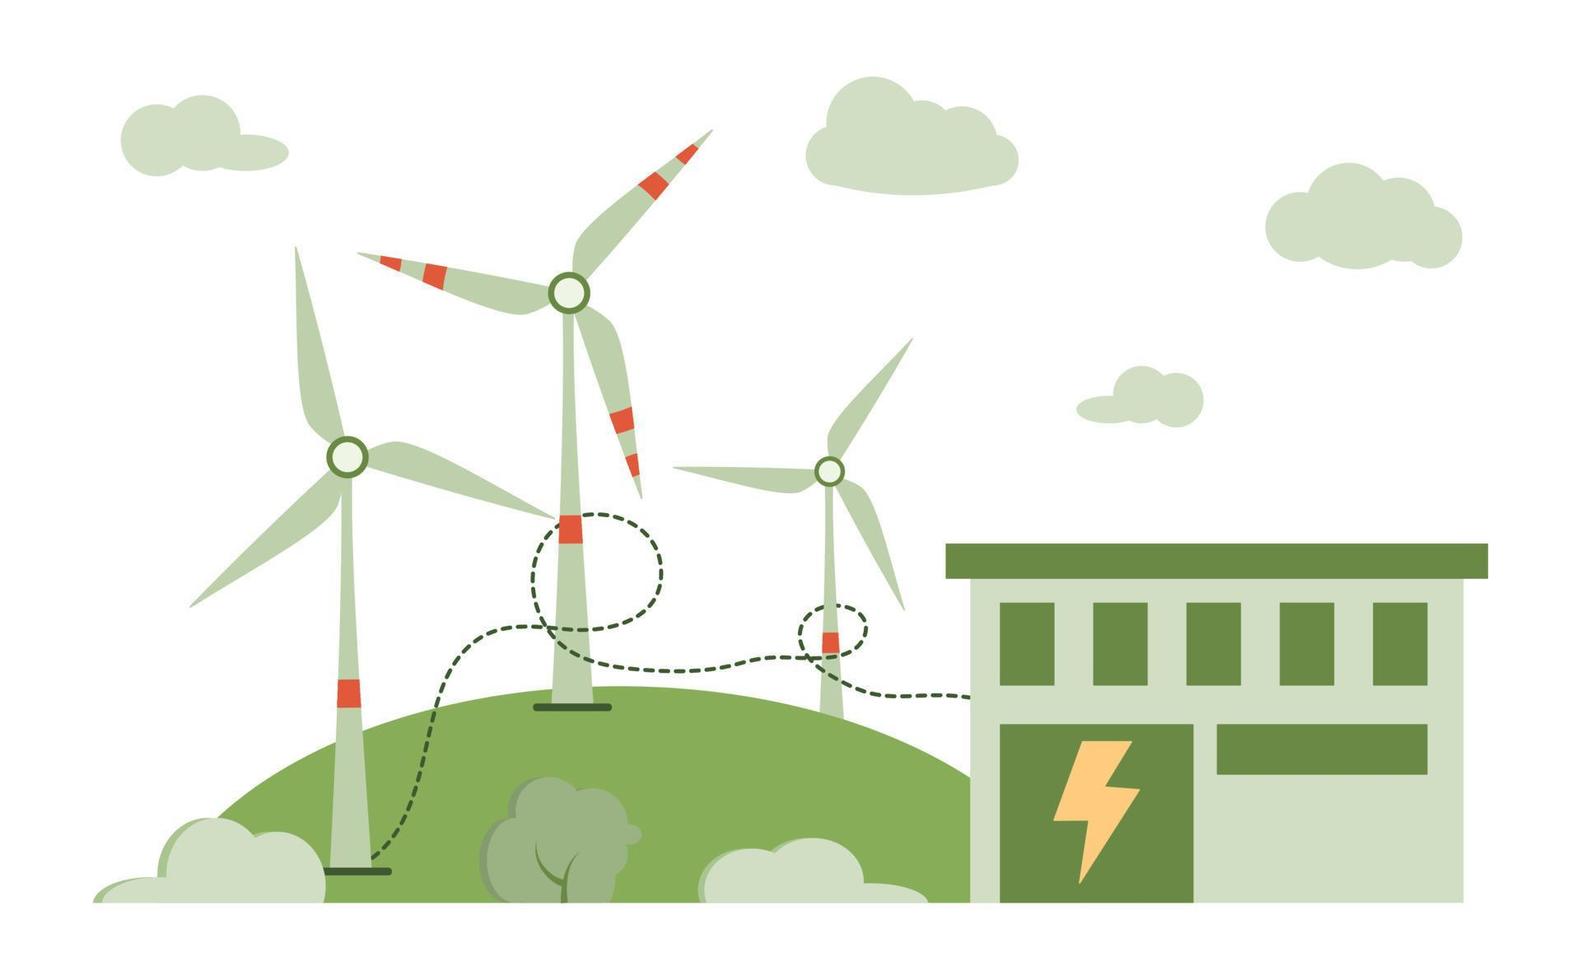 Wind power plant and factory. Wind turbines. Green energy industrial concept. Vector illustration in flat style of clean electric energy from renewable wind sources.